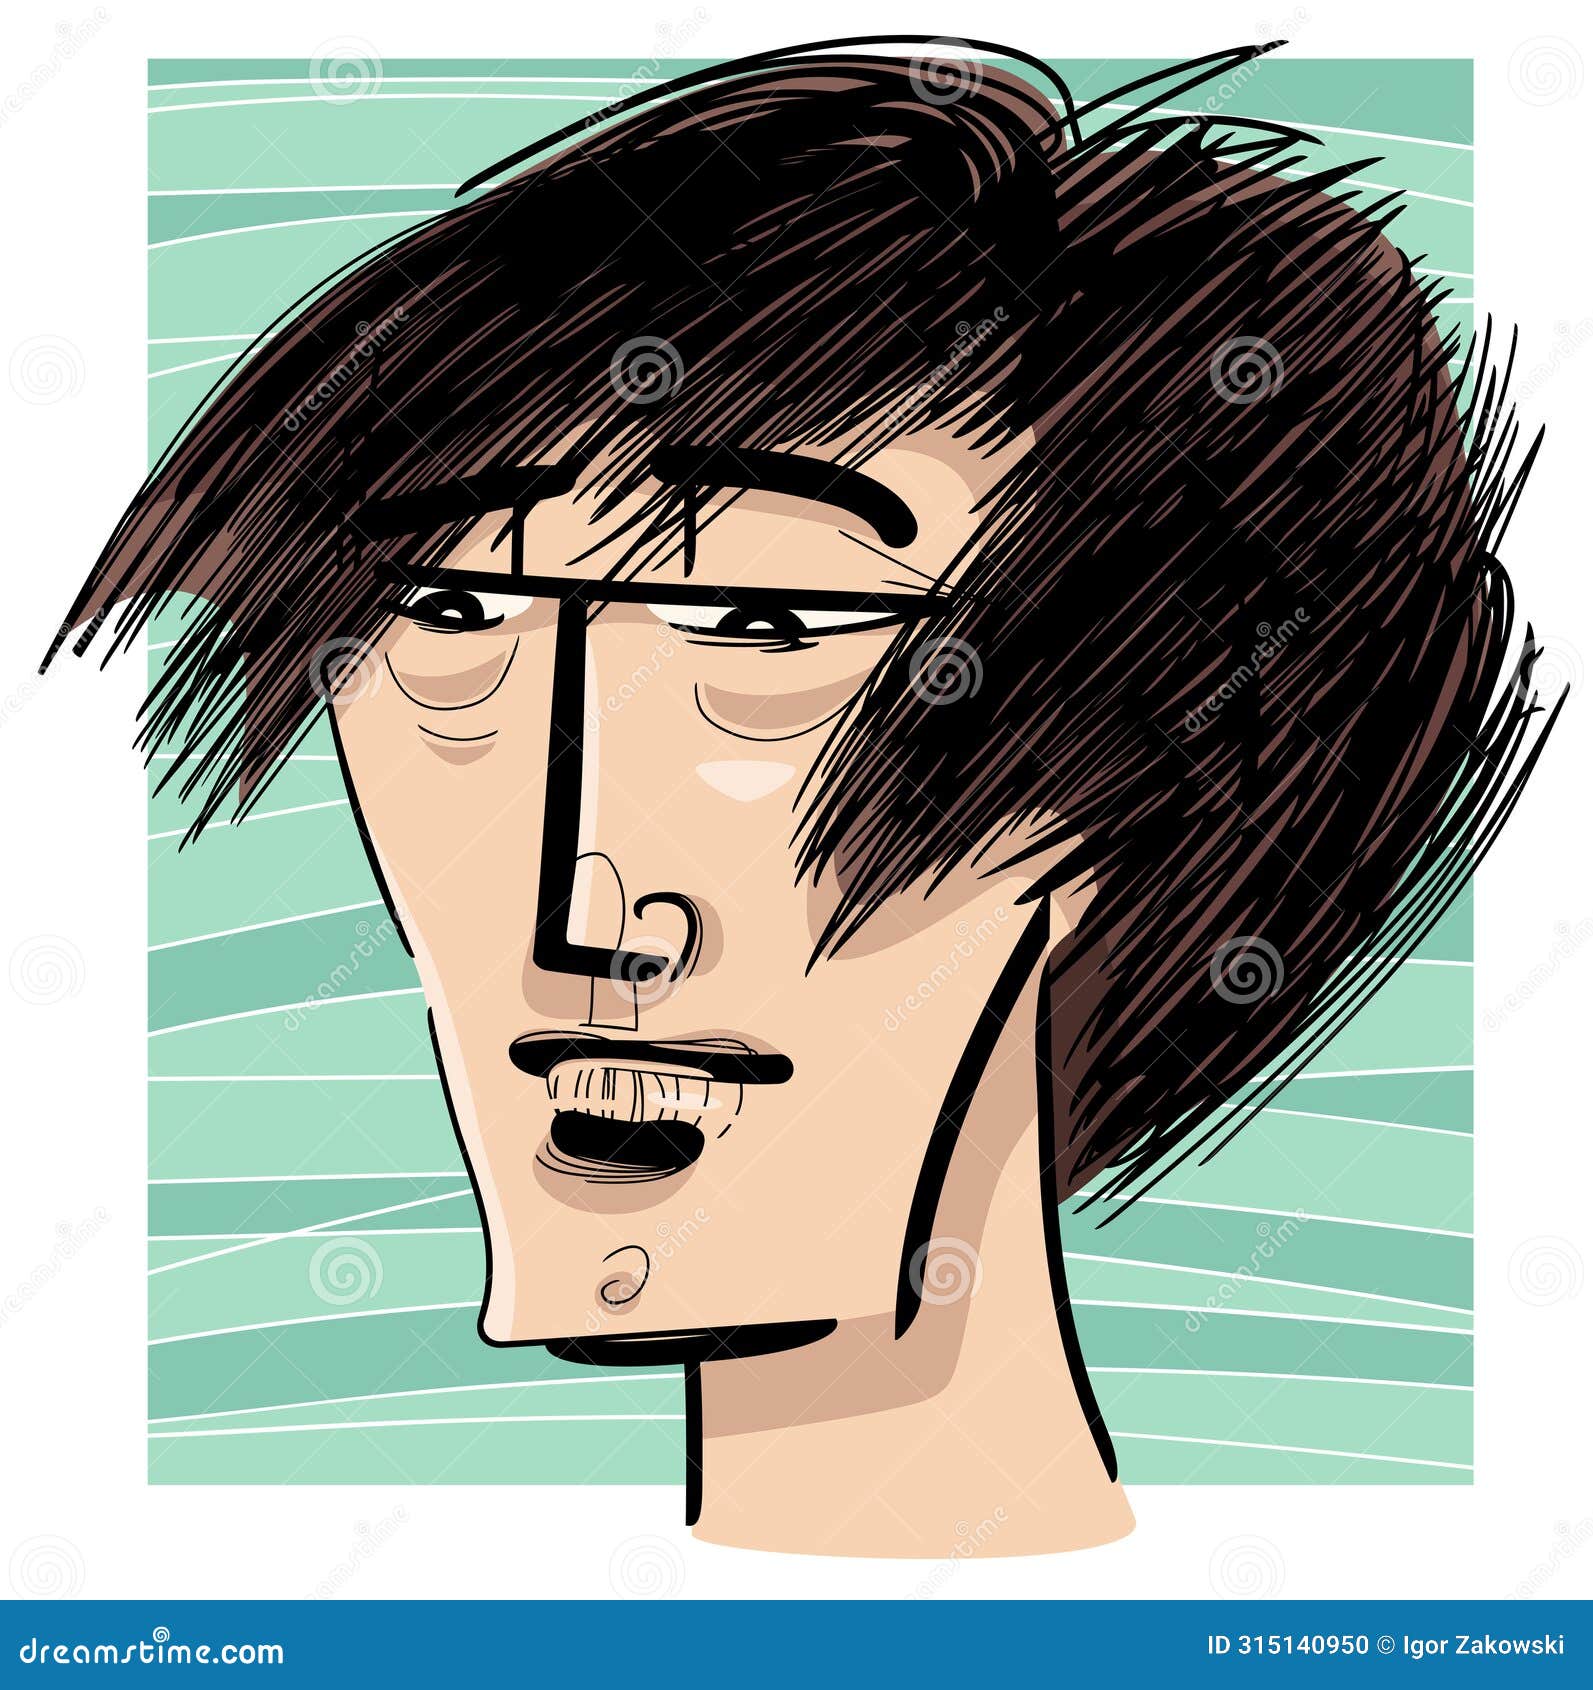 young man portrait caricature cartoon drawing 